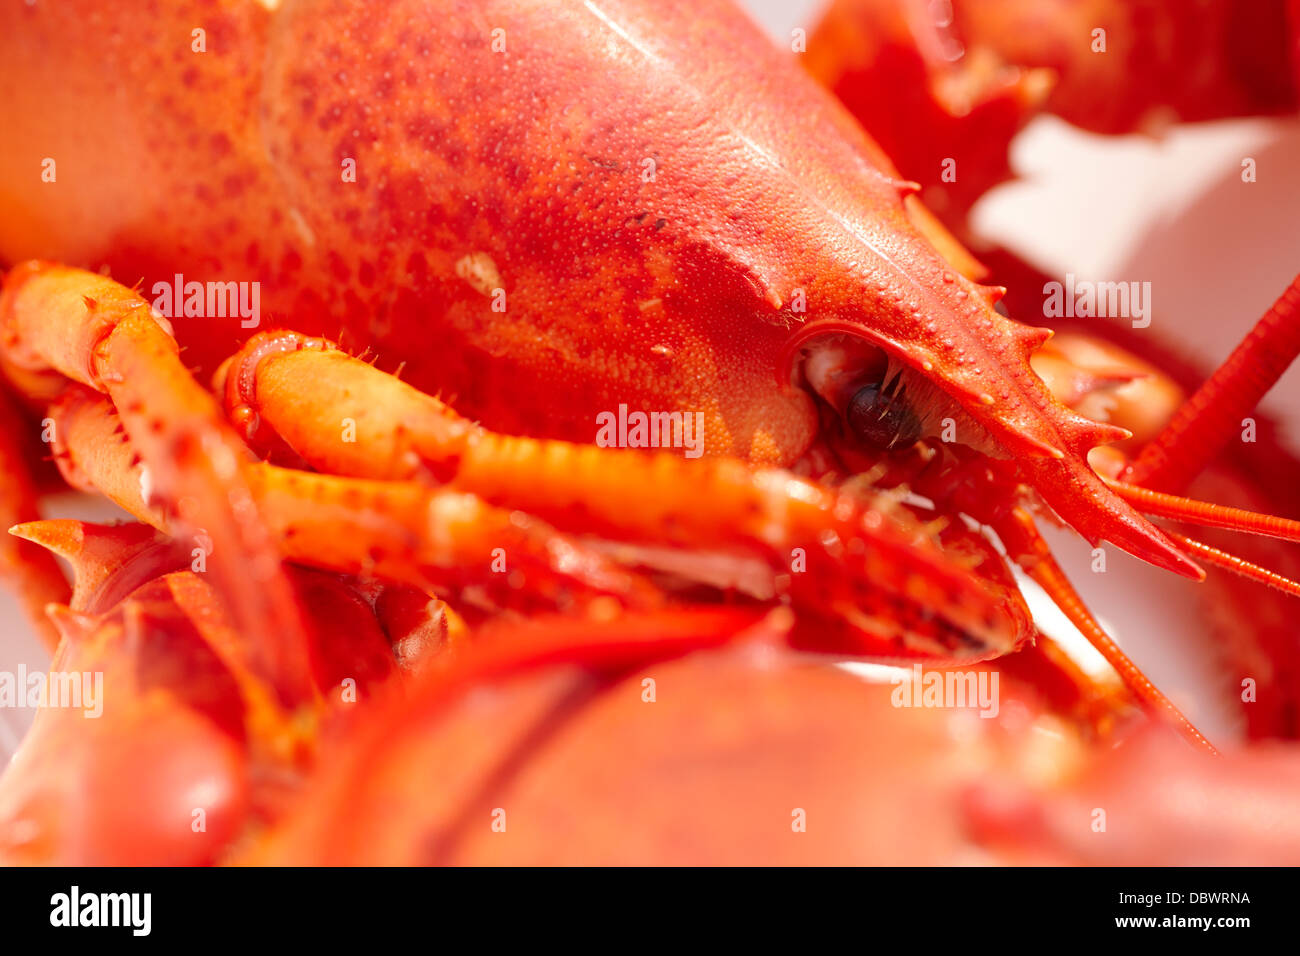 A cooked Maine lobster, ready to eat Stock Photo